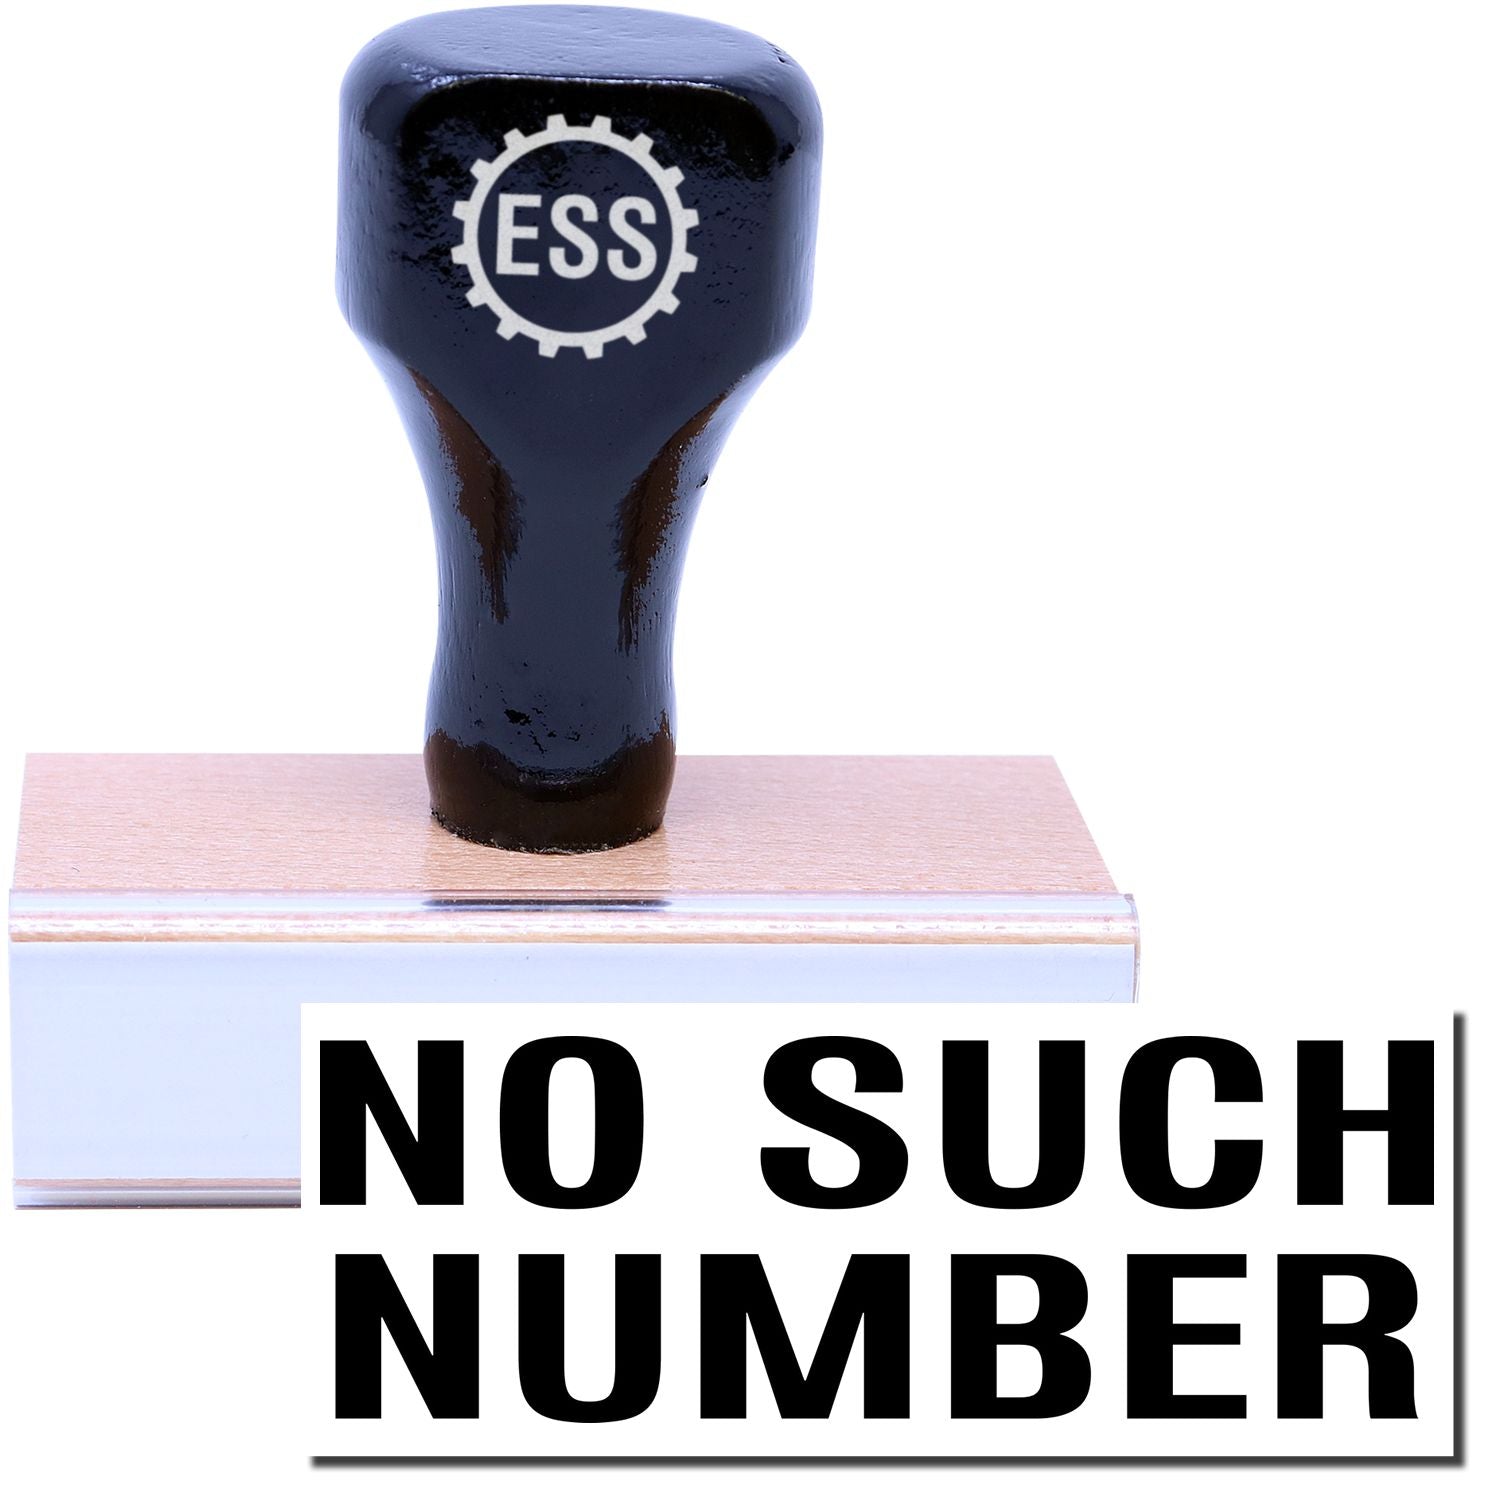 A stock office rubber stamp with a stamped image showing how the text "NO SUCH NUMBER" in a large font is displayed after stamping.